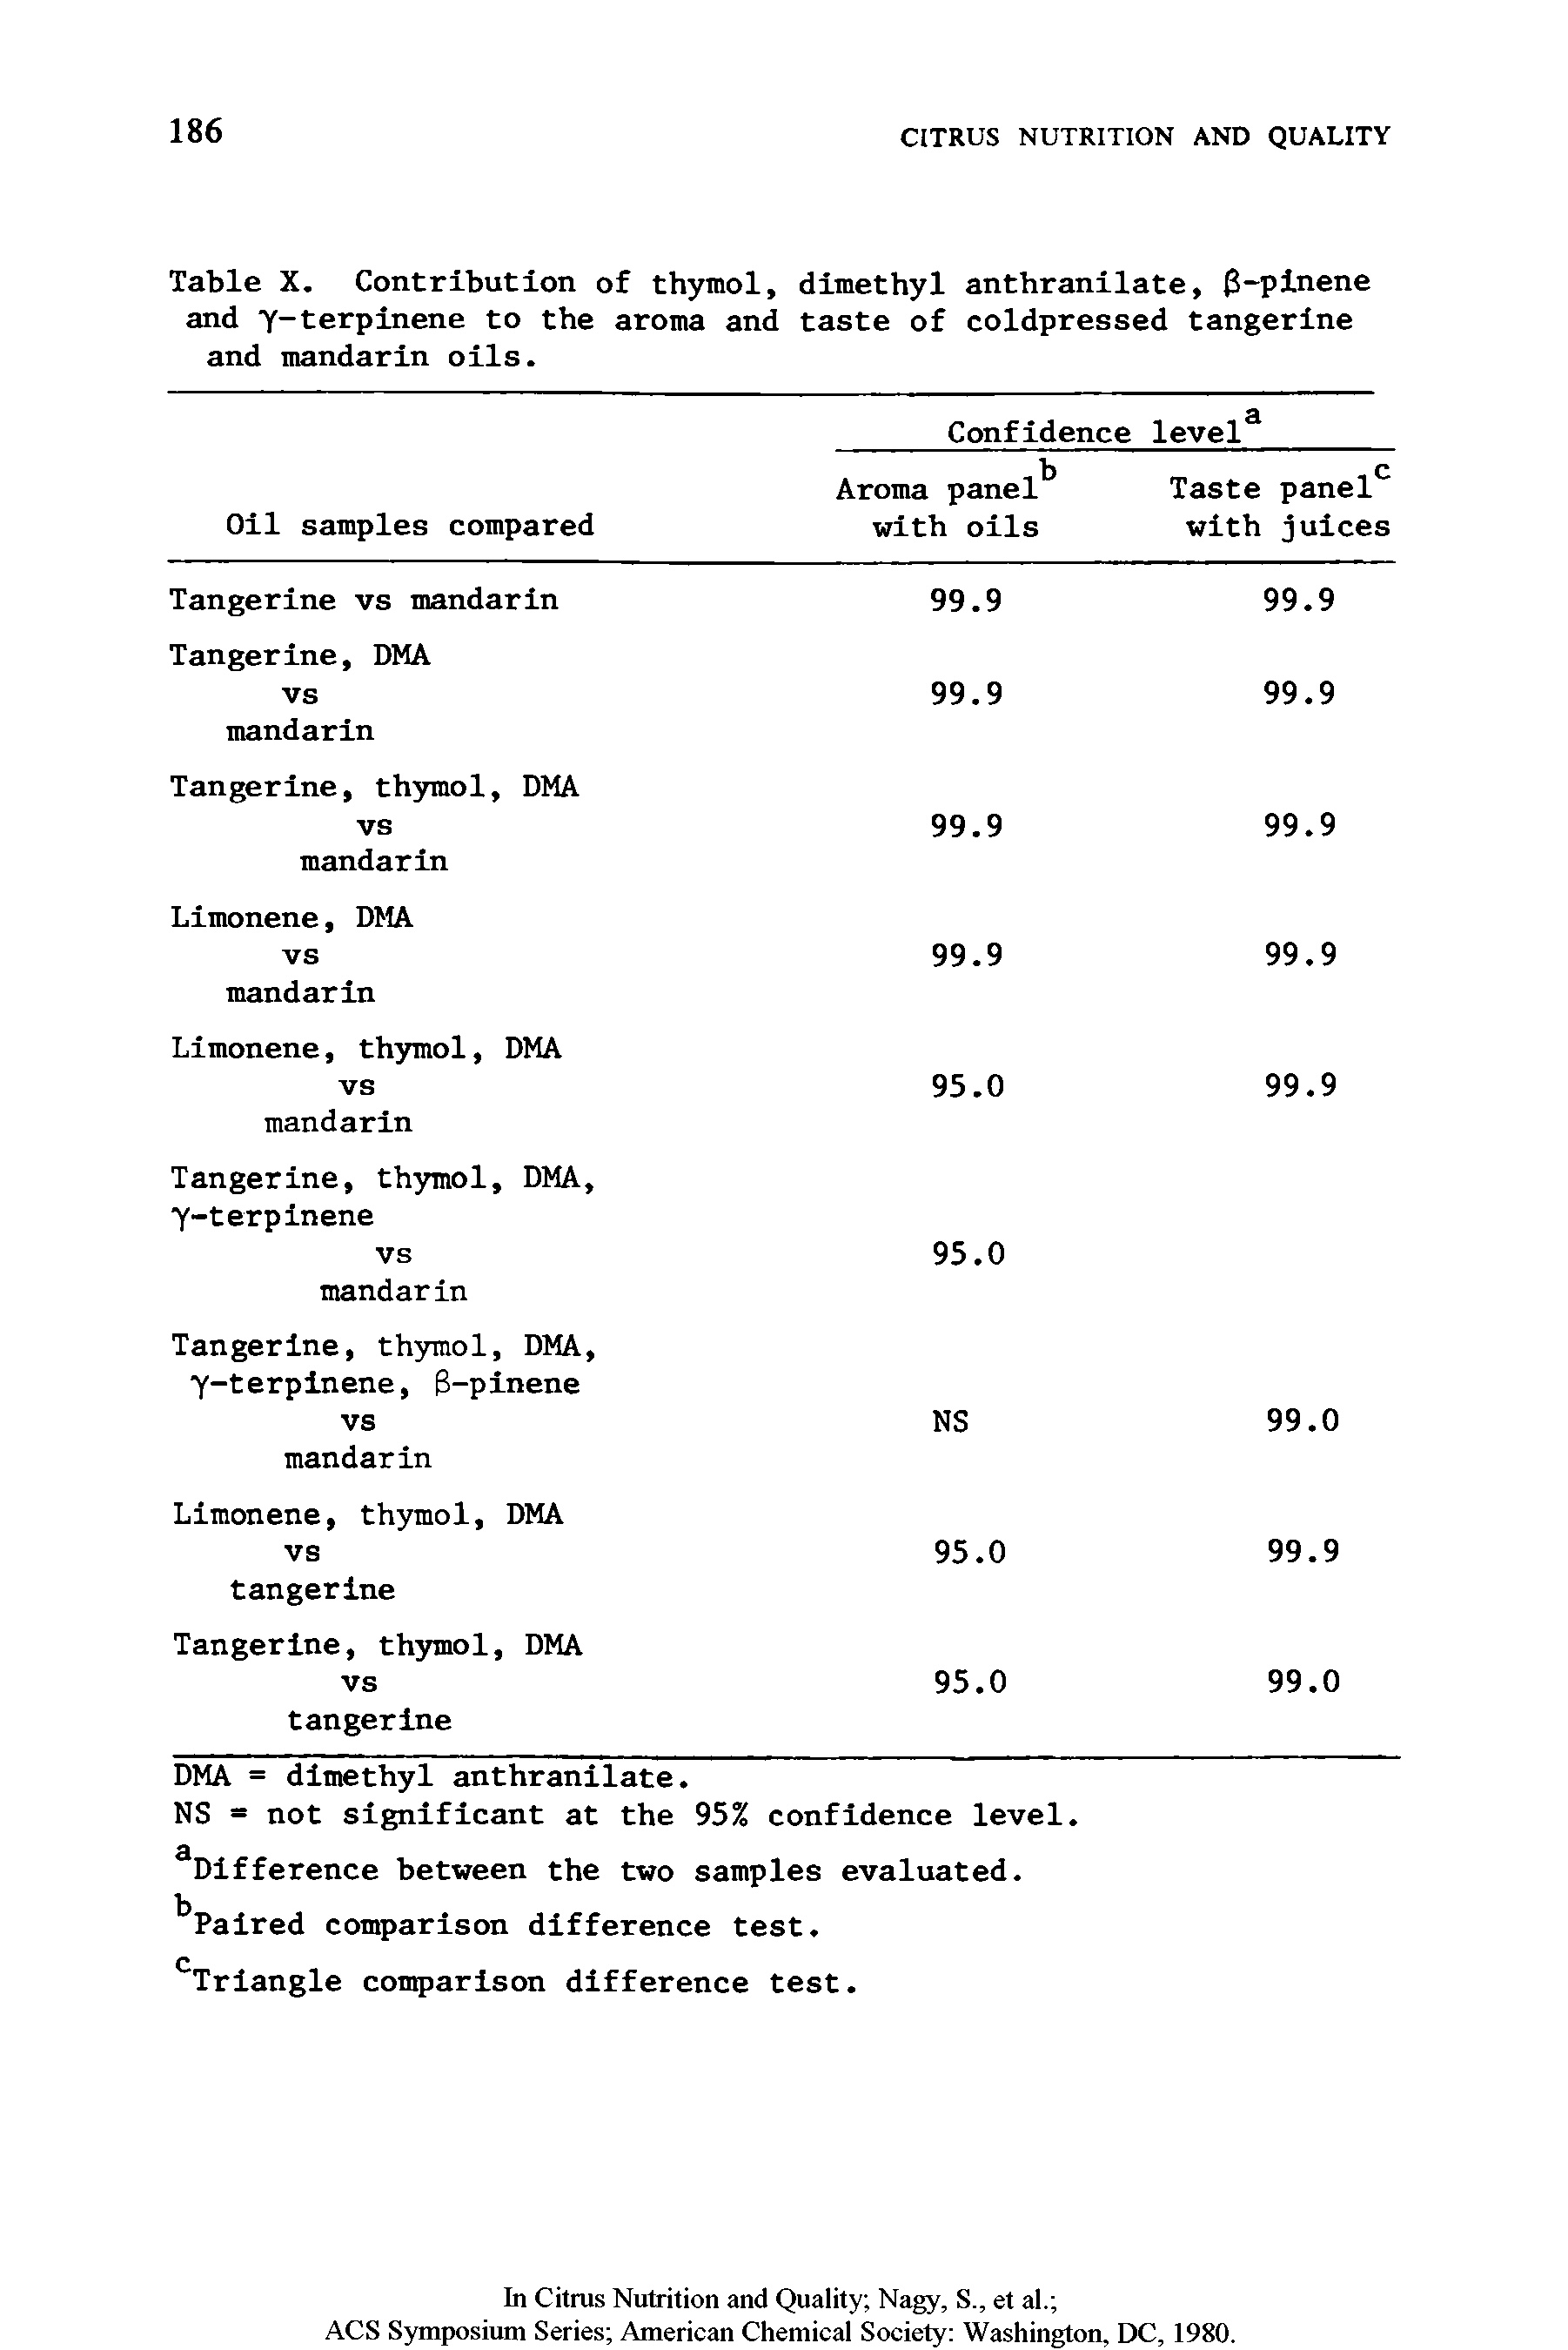 Table X. Contribution of thymol, dimethyl anthranilate, 3-pinene and y-terpinene to the aroma and taste of coldpressed tangerine and mandarin oils.